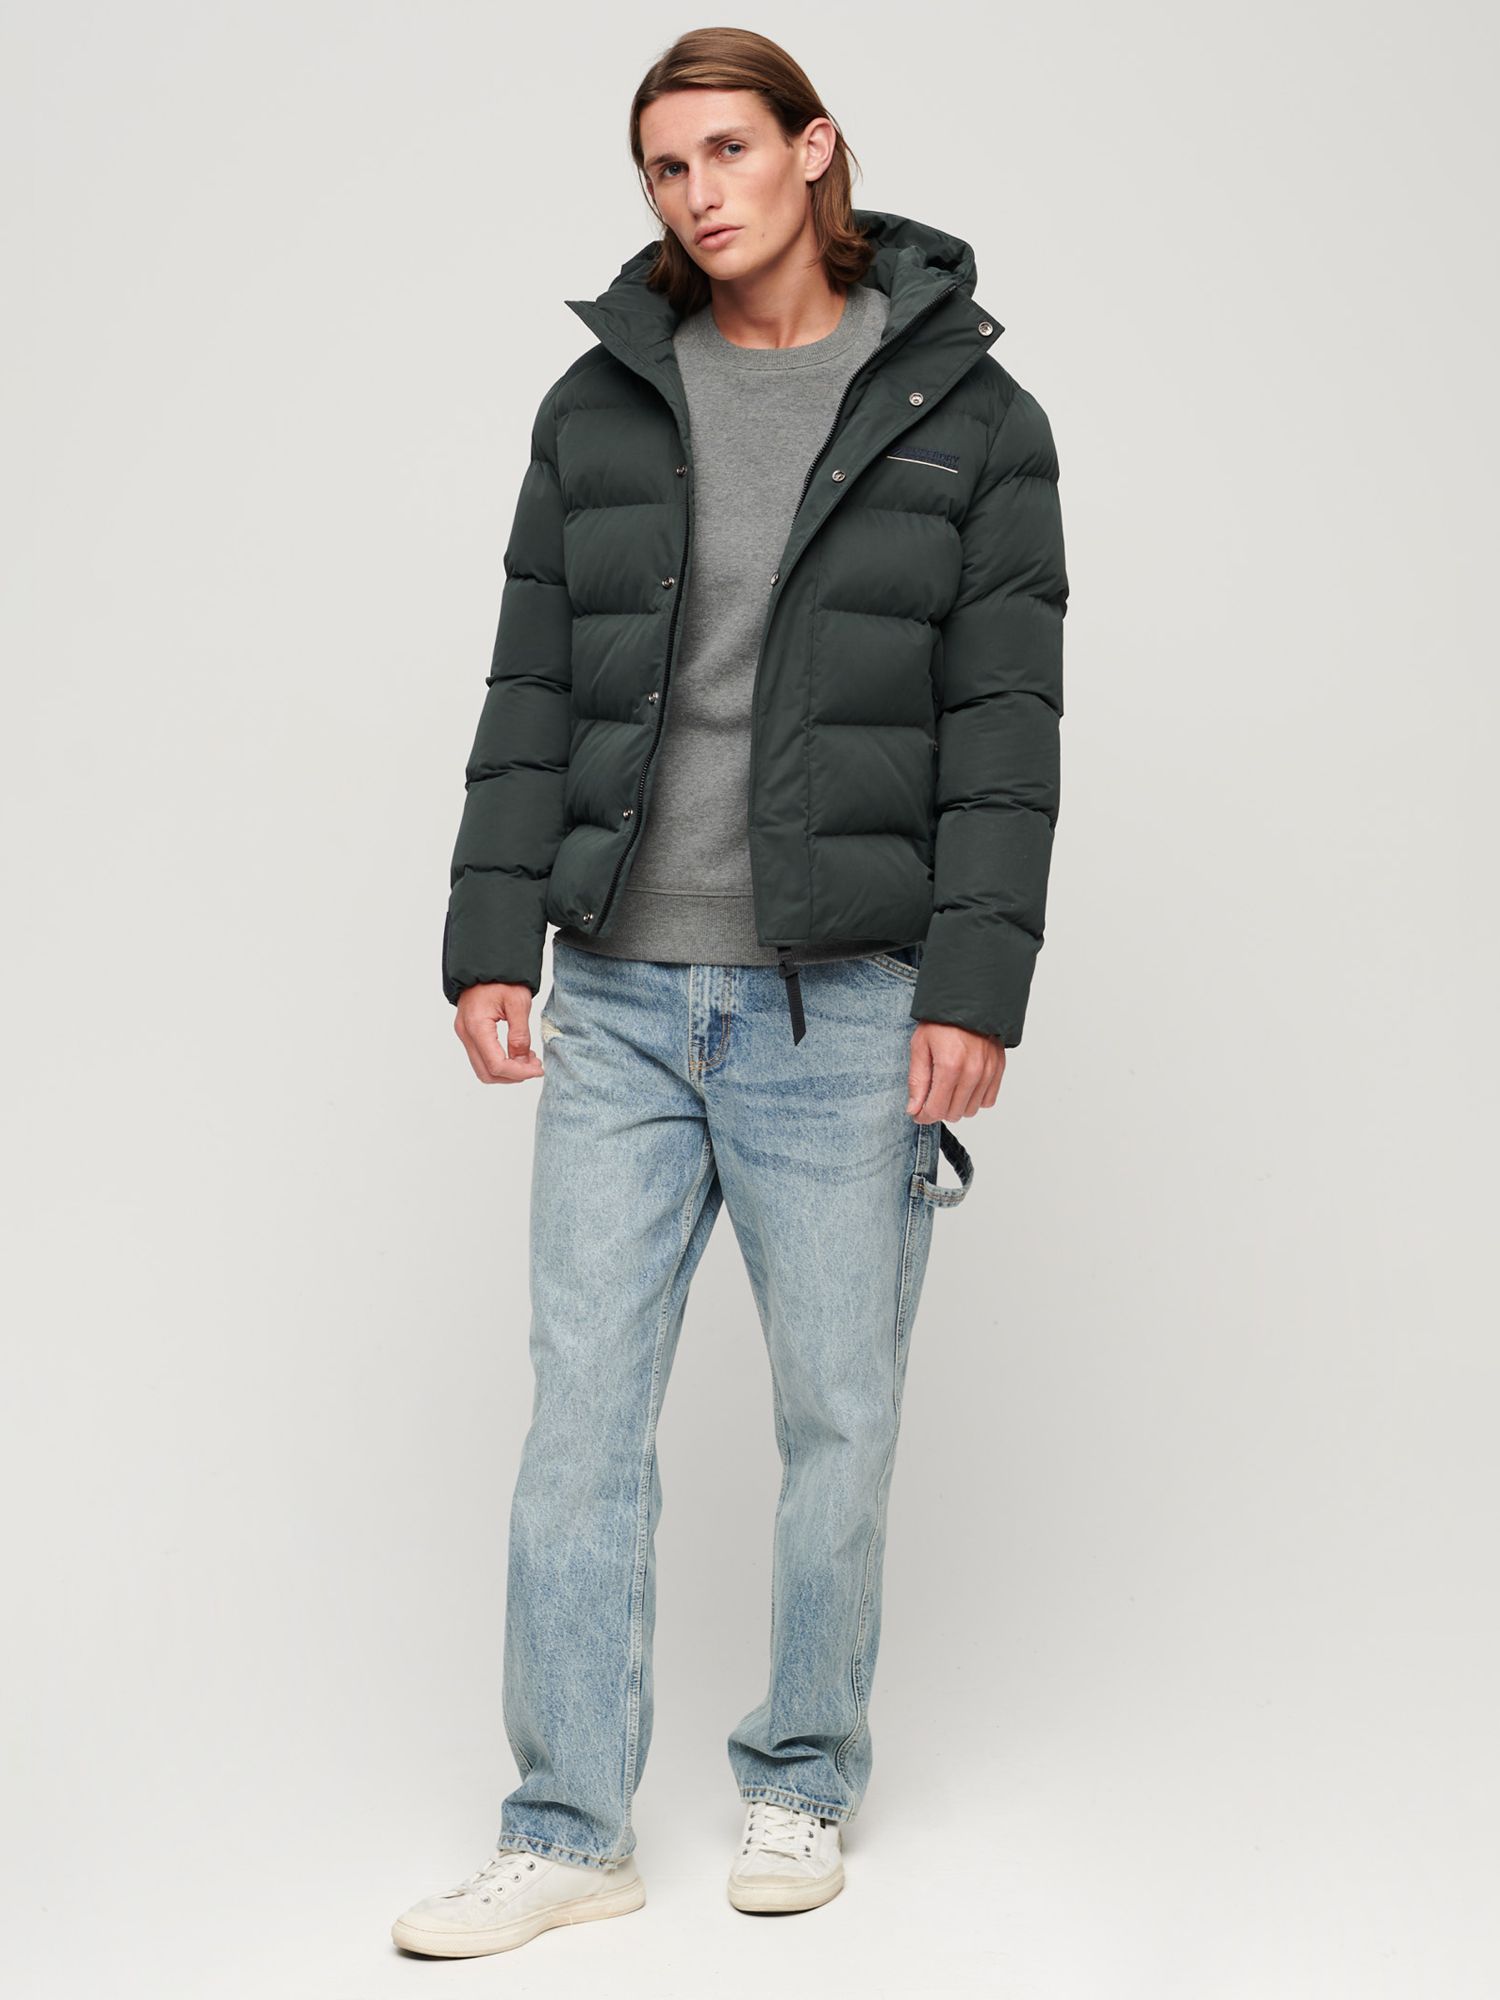 Superdry Hooded Microfibre Sports Puffer Jacket, Black at John Lewis &  Partners